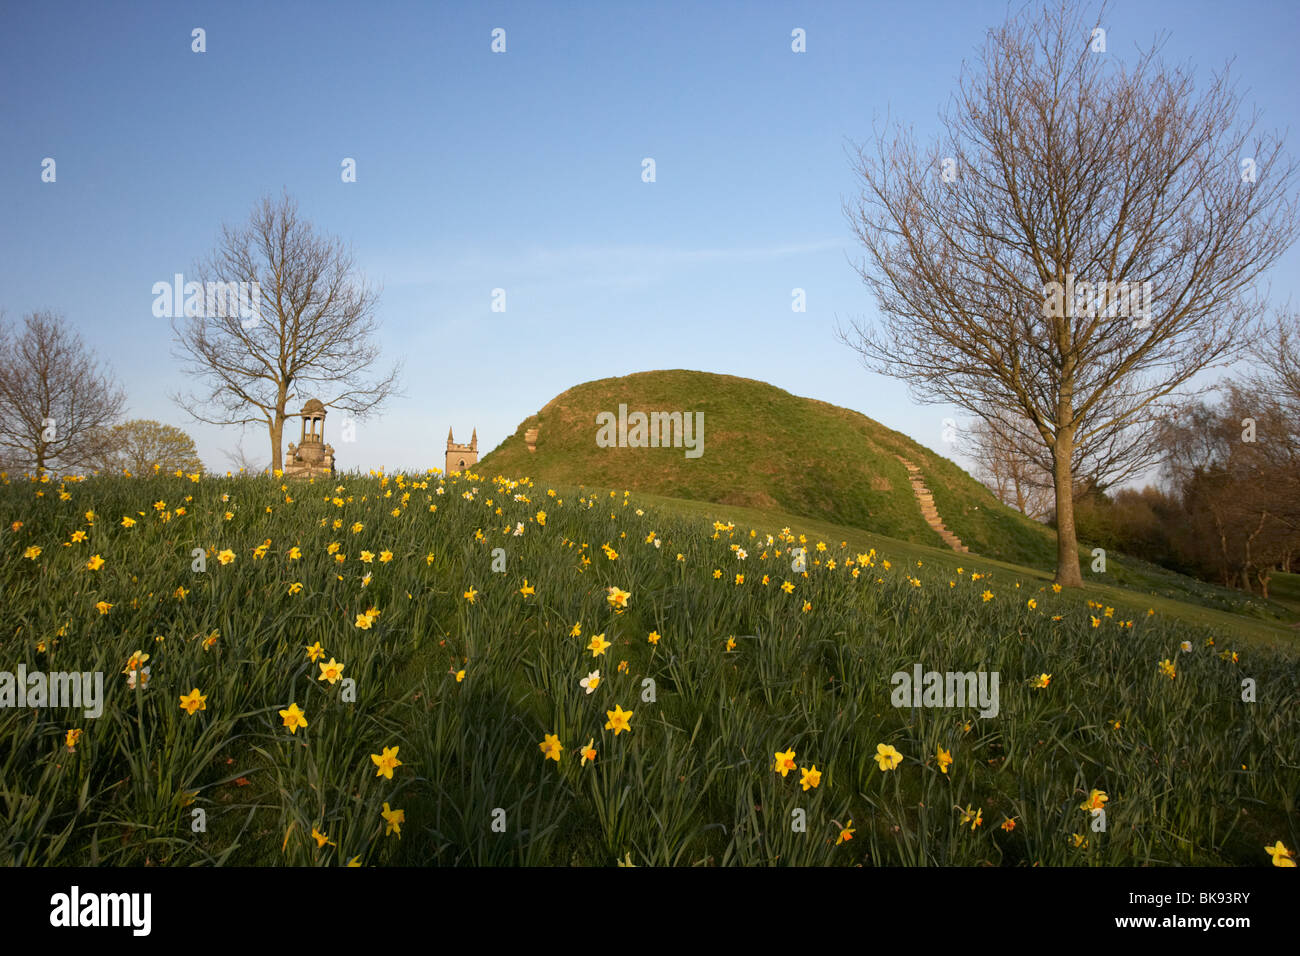 Dundonald moat or motte man made artificial mound for a fort county down northern ireland uk Stock Photo